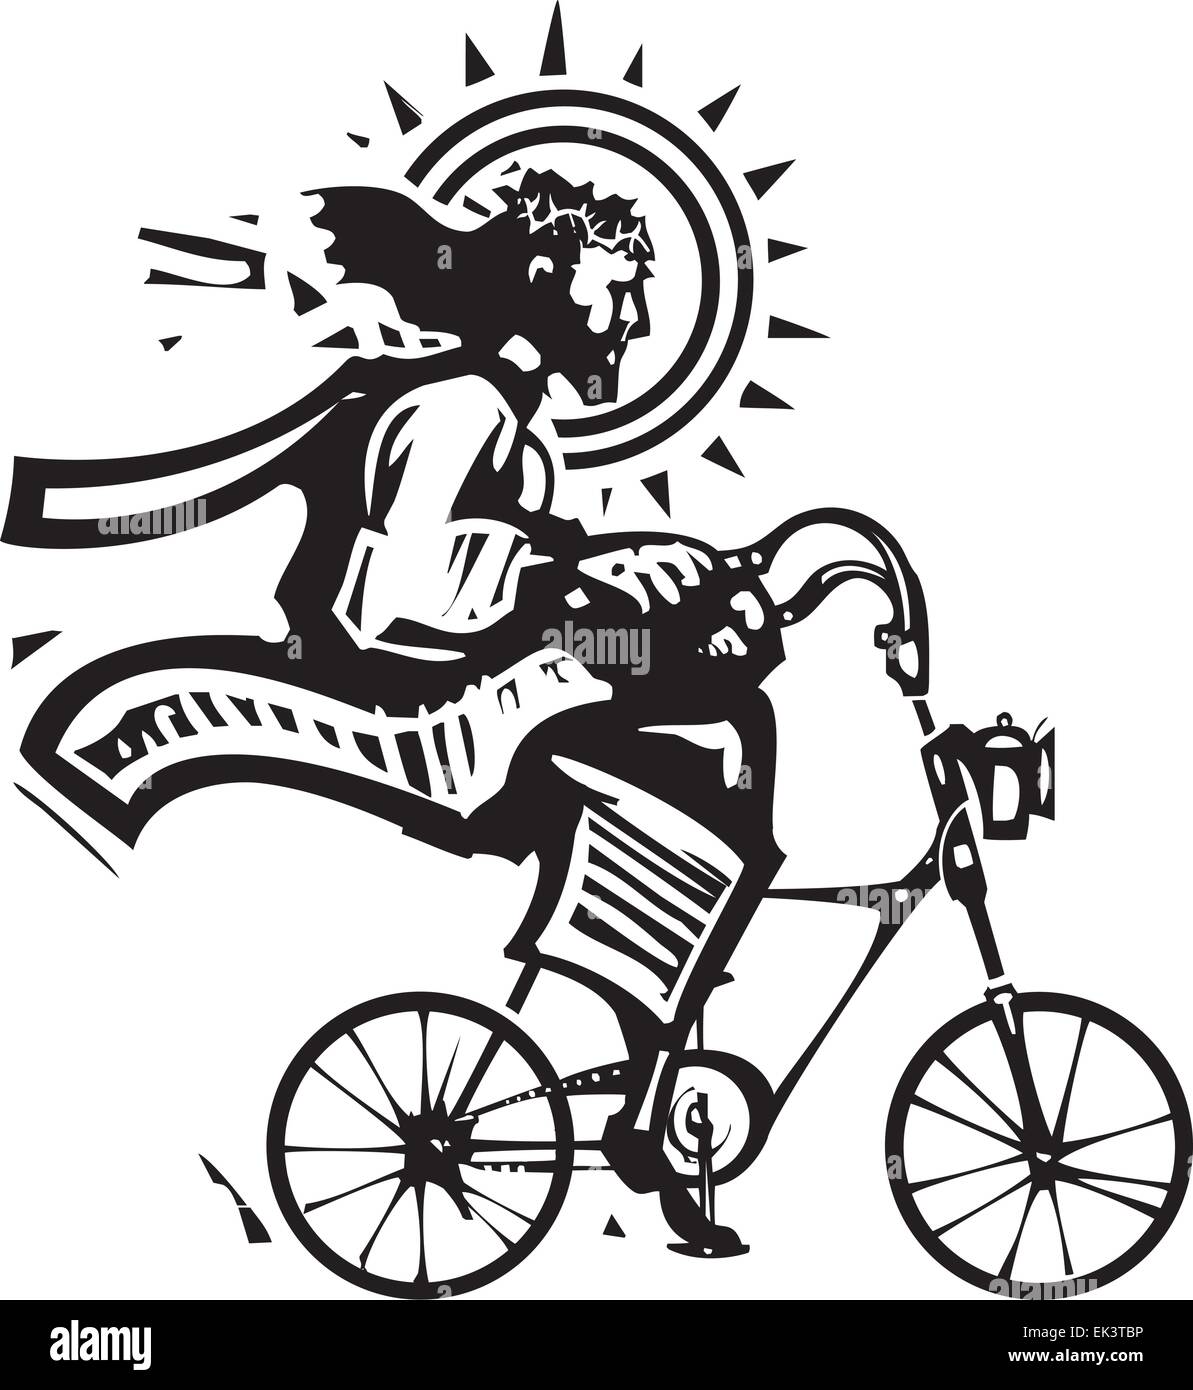 Woodcut Style image of Jesus Christ riding a fixie bicycle Stock Vector